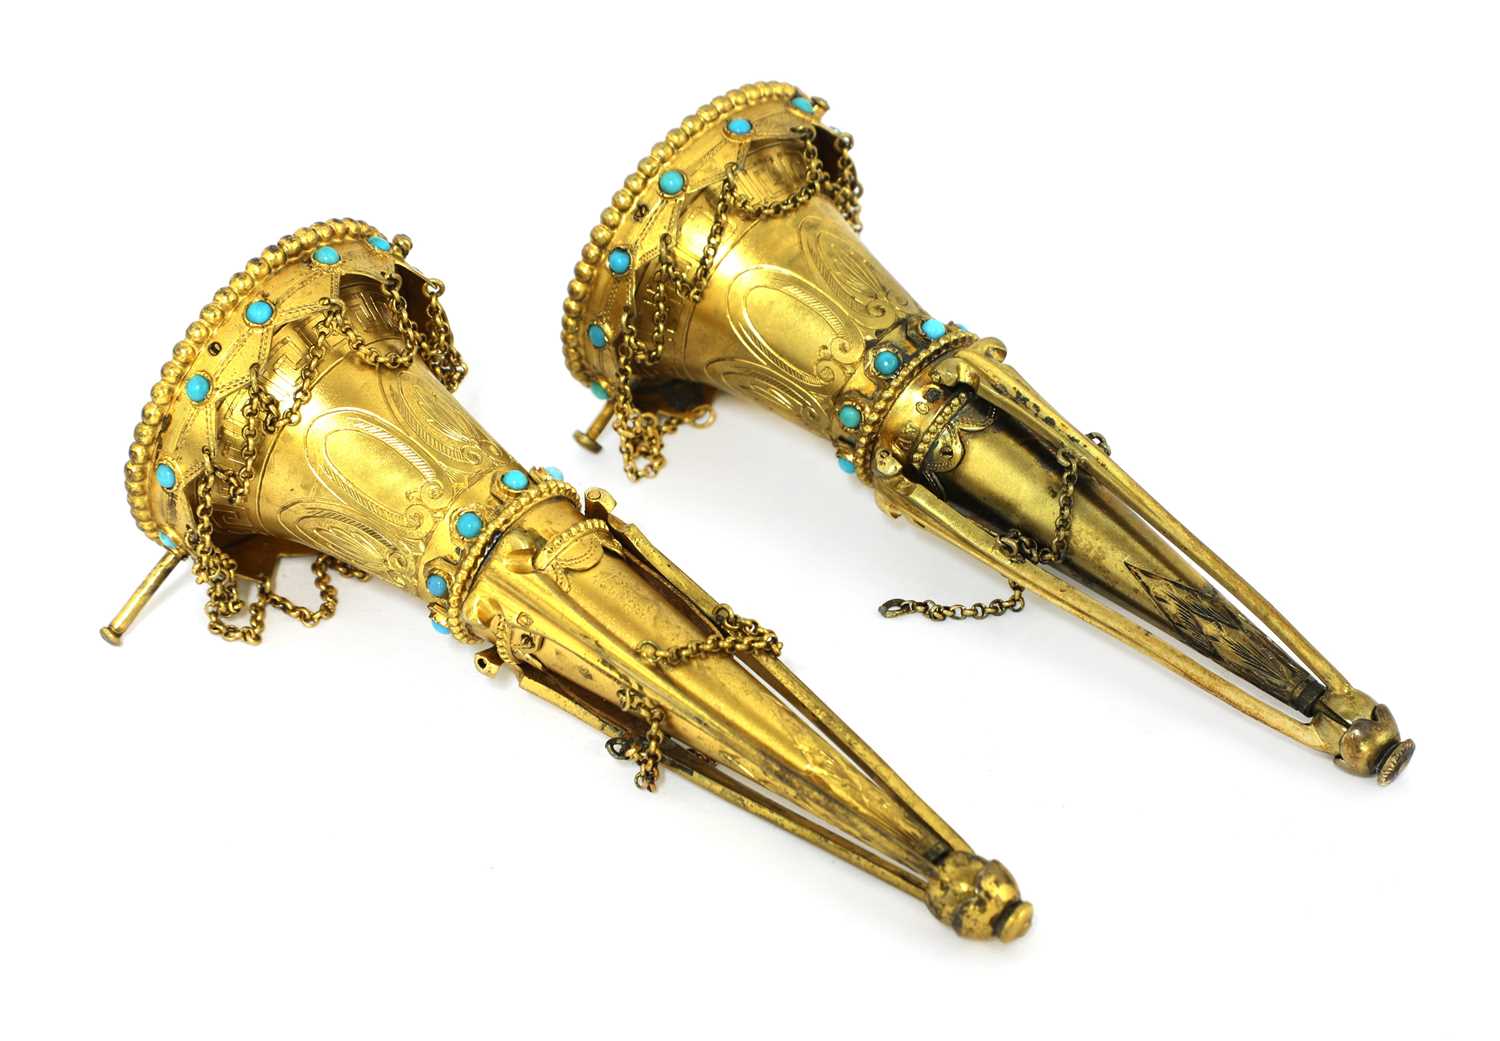 Lot 50 - A pair of Victorian silver gilt ecclesiastical posy vases